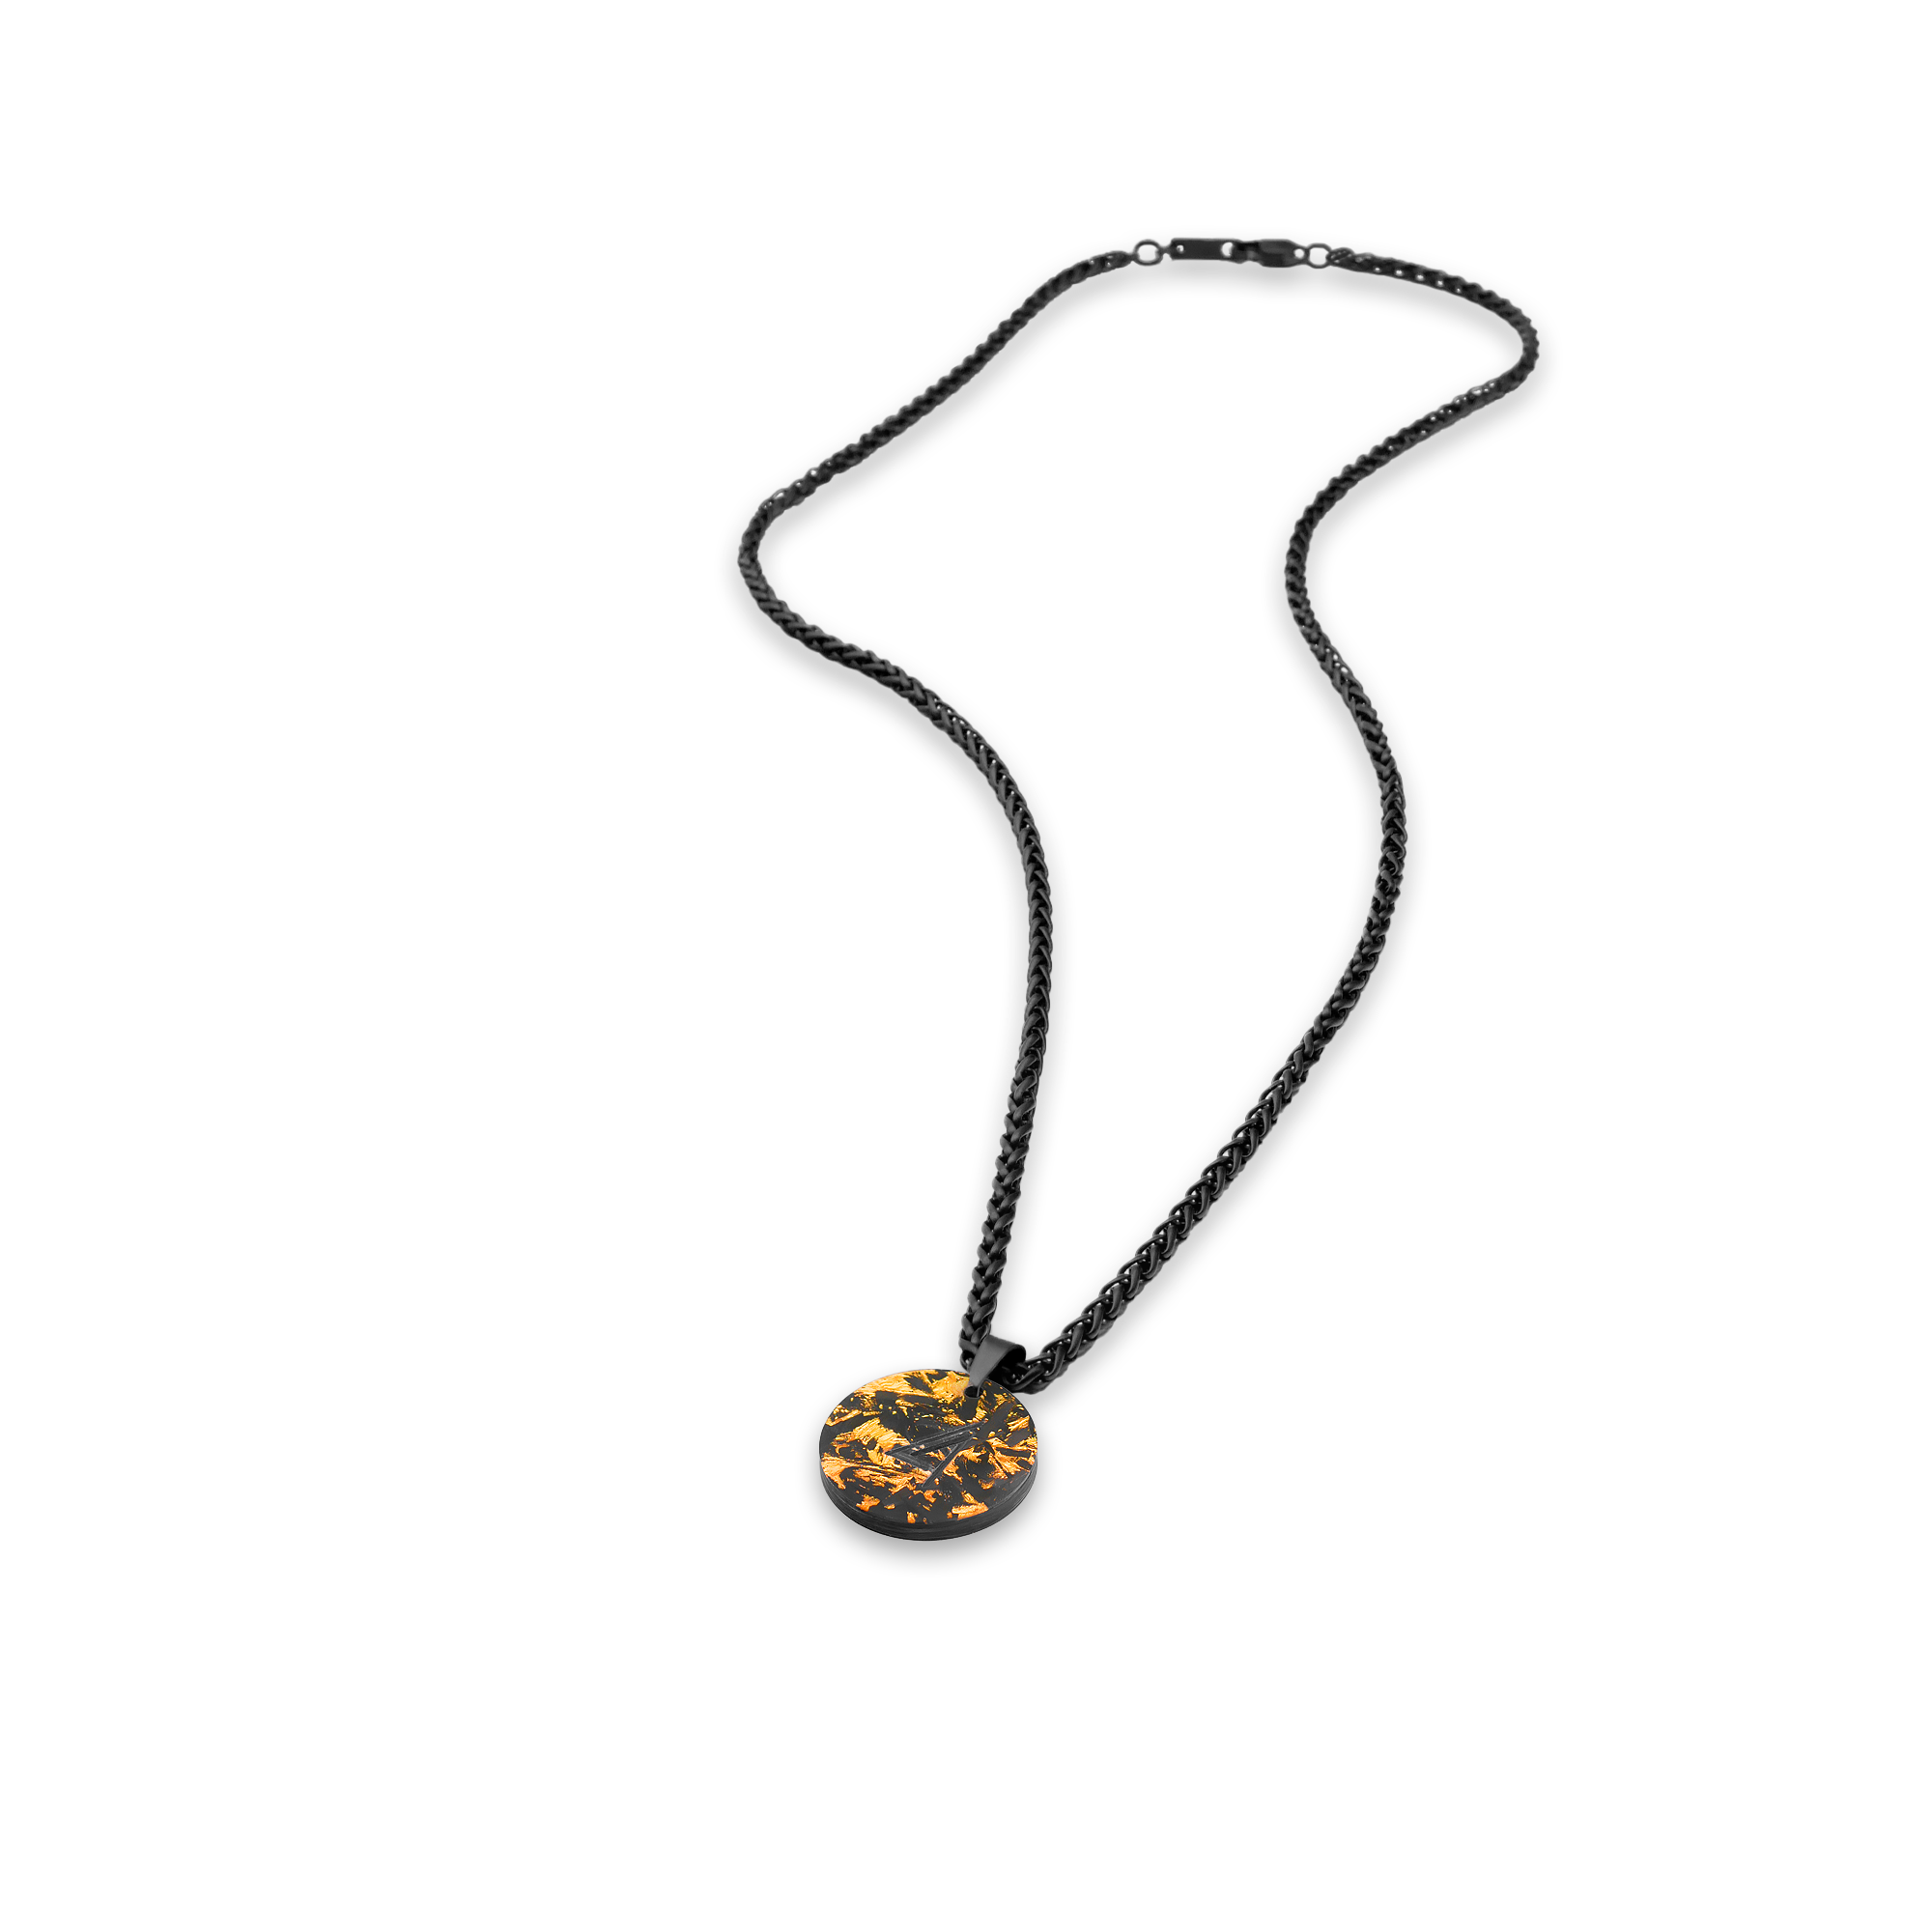 GOLD MEDAL - KEEL CHAIN